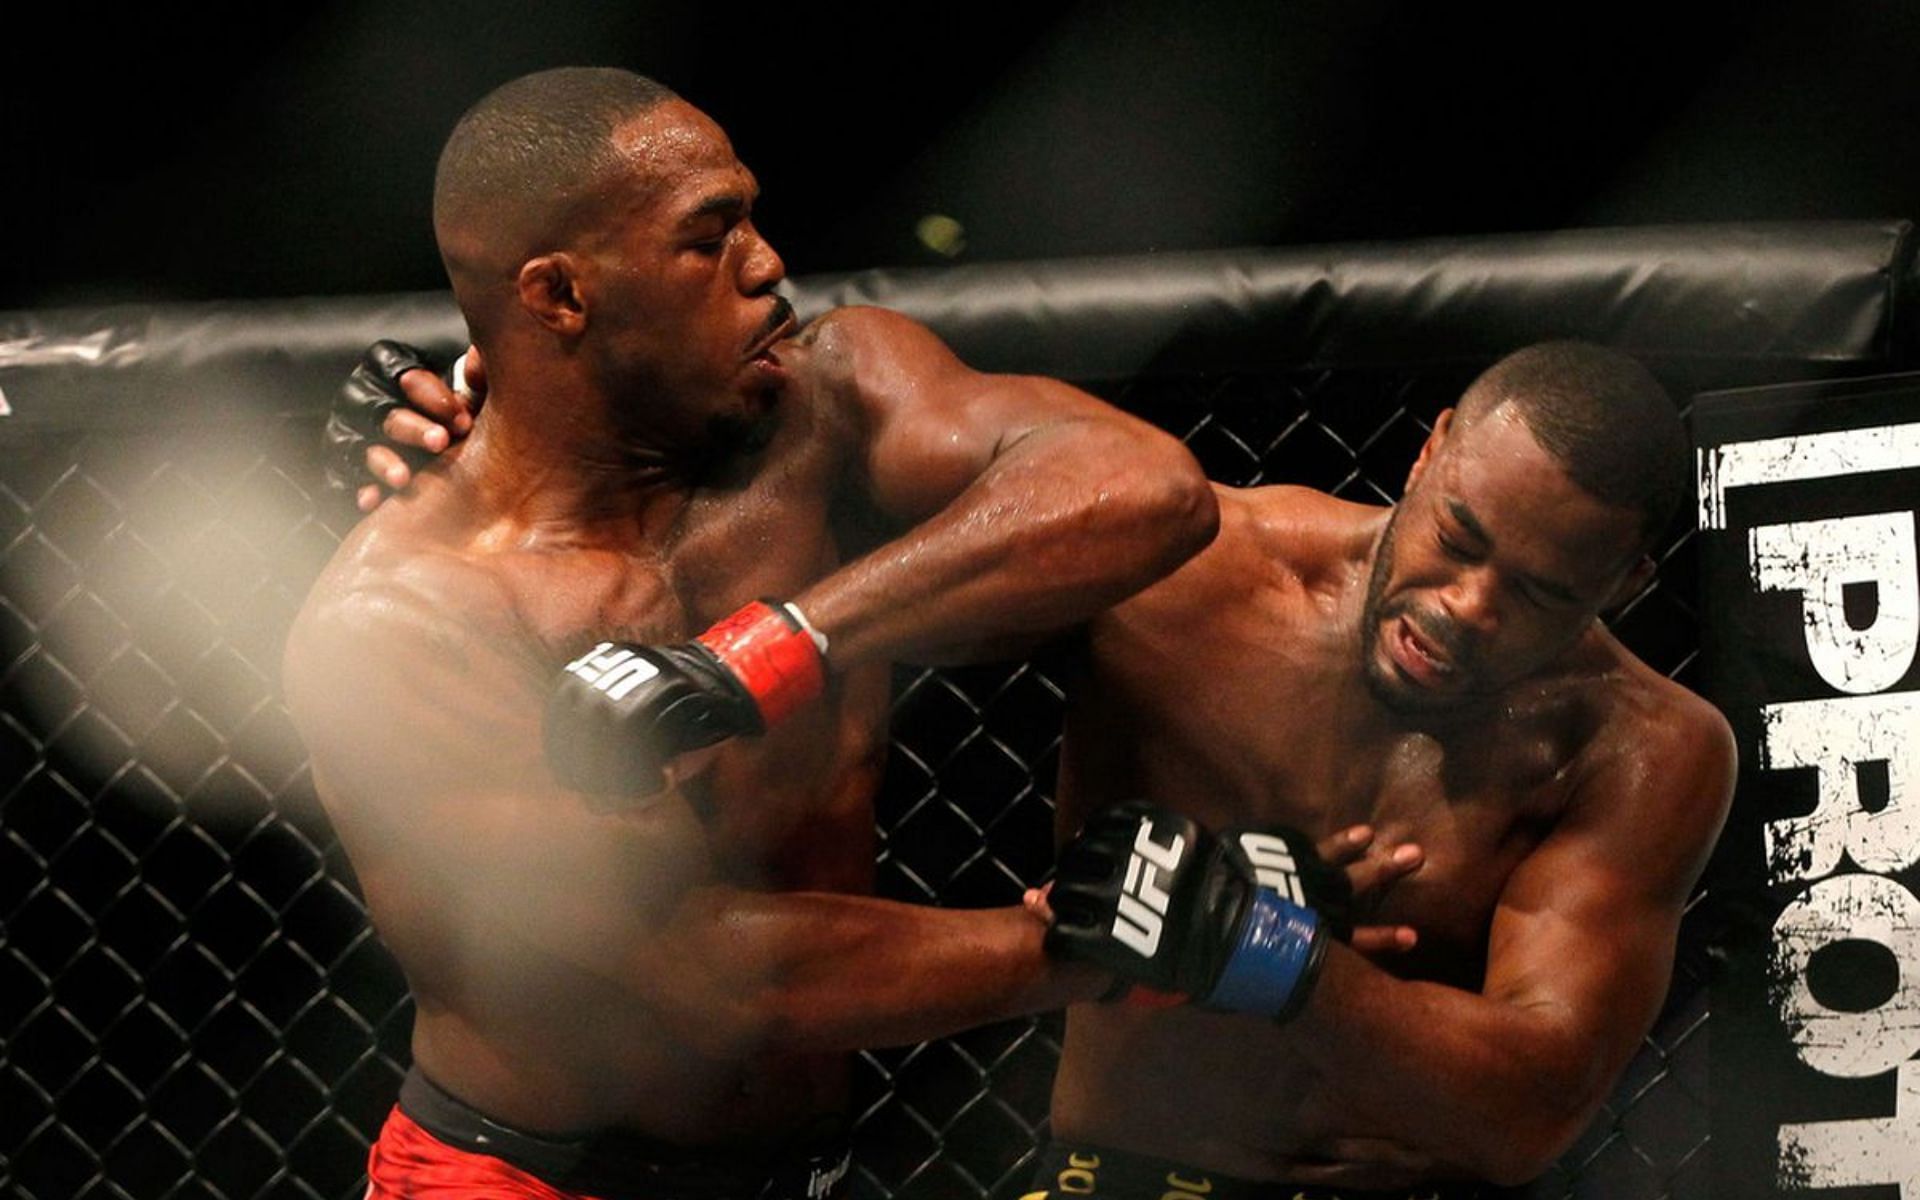 Jon Jones and Rashad Evans saw their friendship fall apart leading into their UFC title fight in 2012